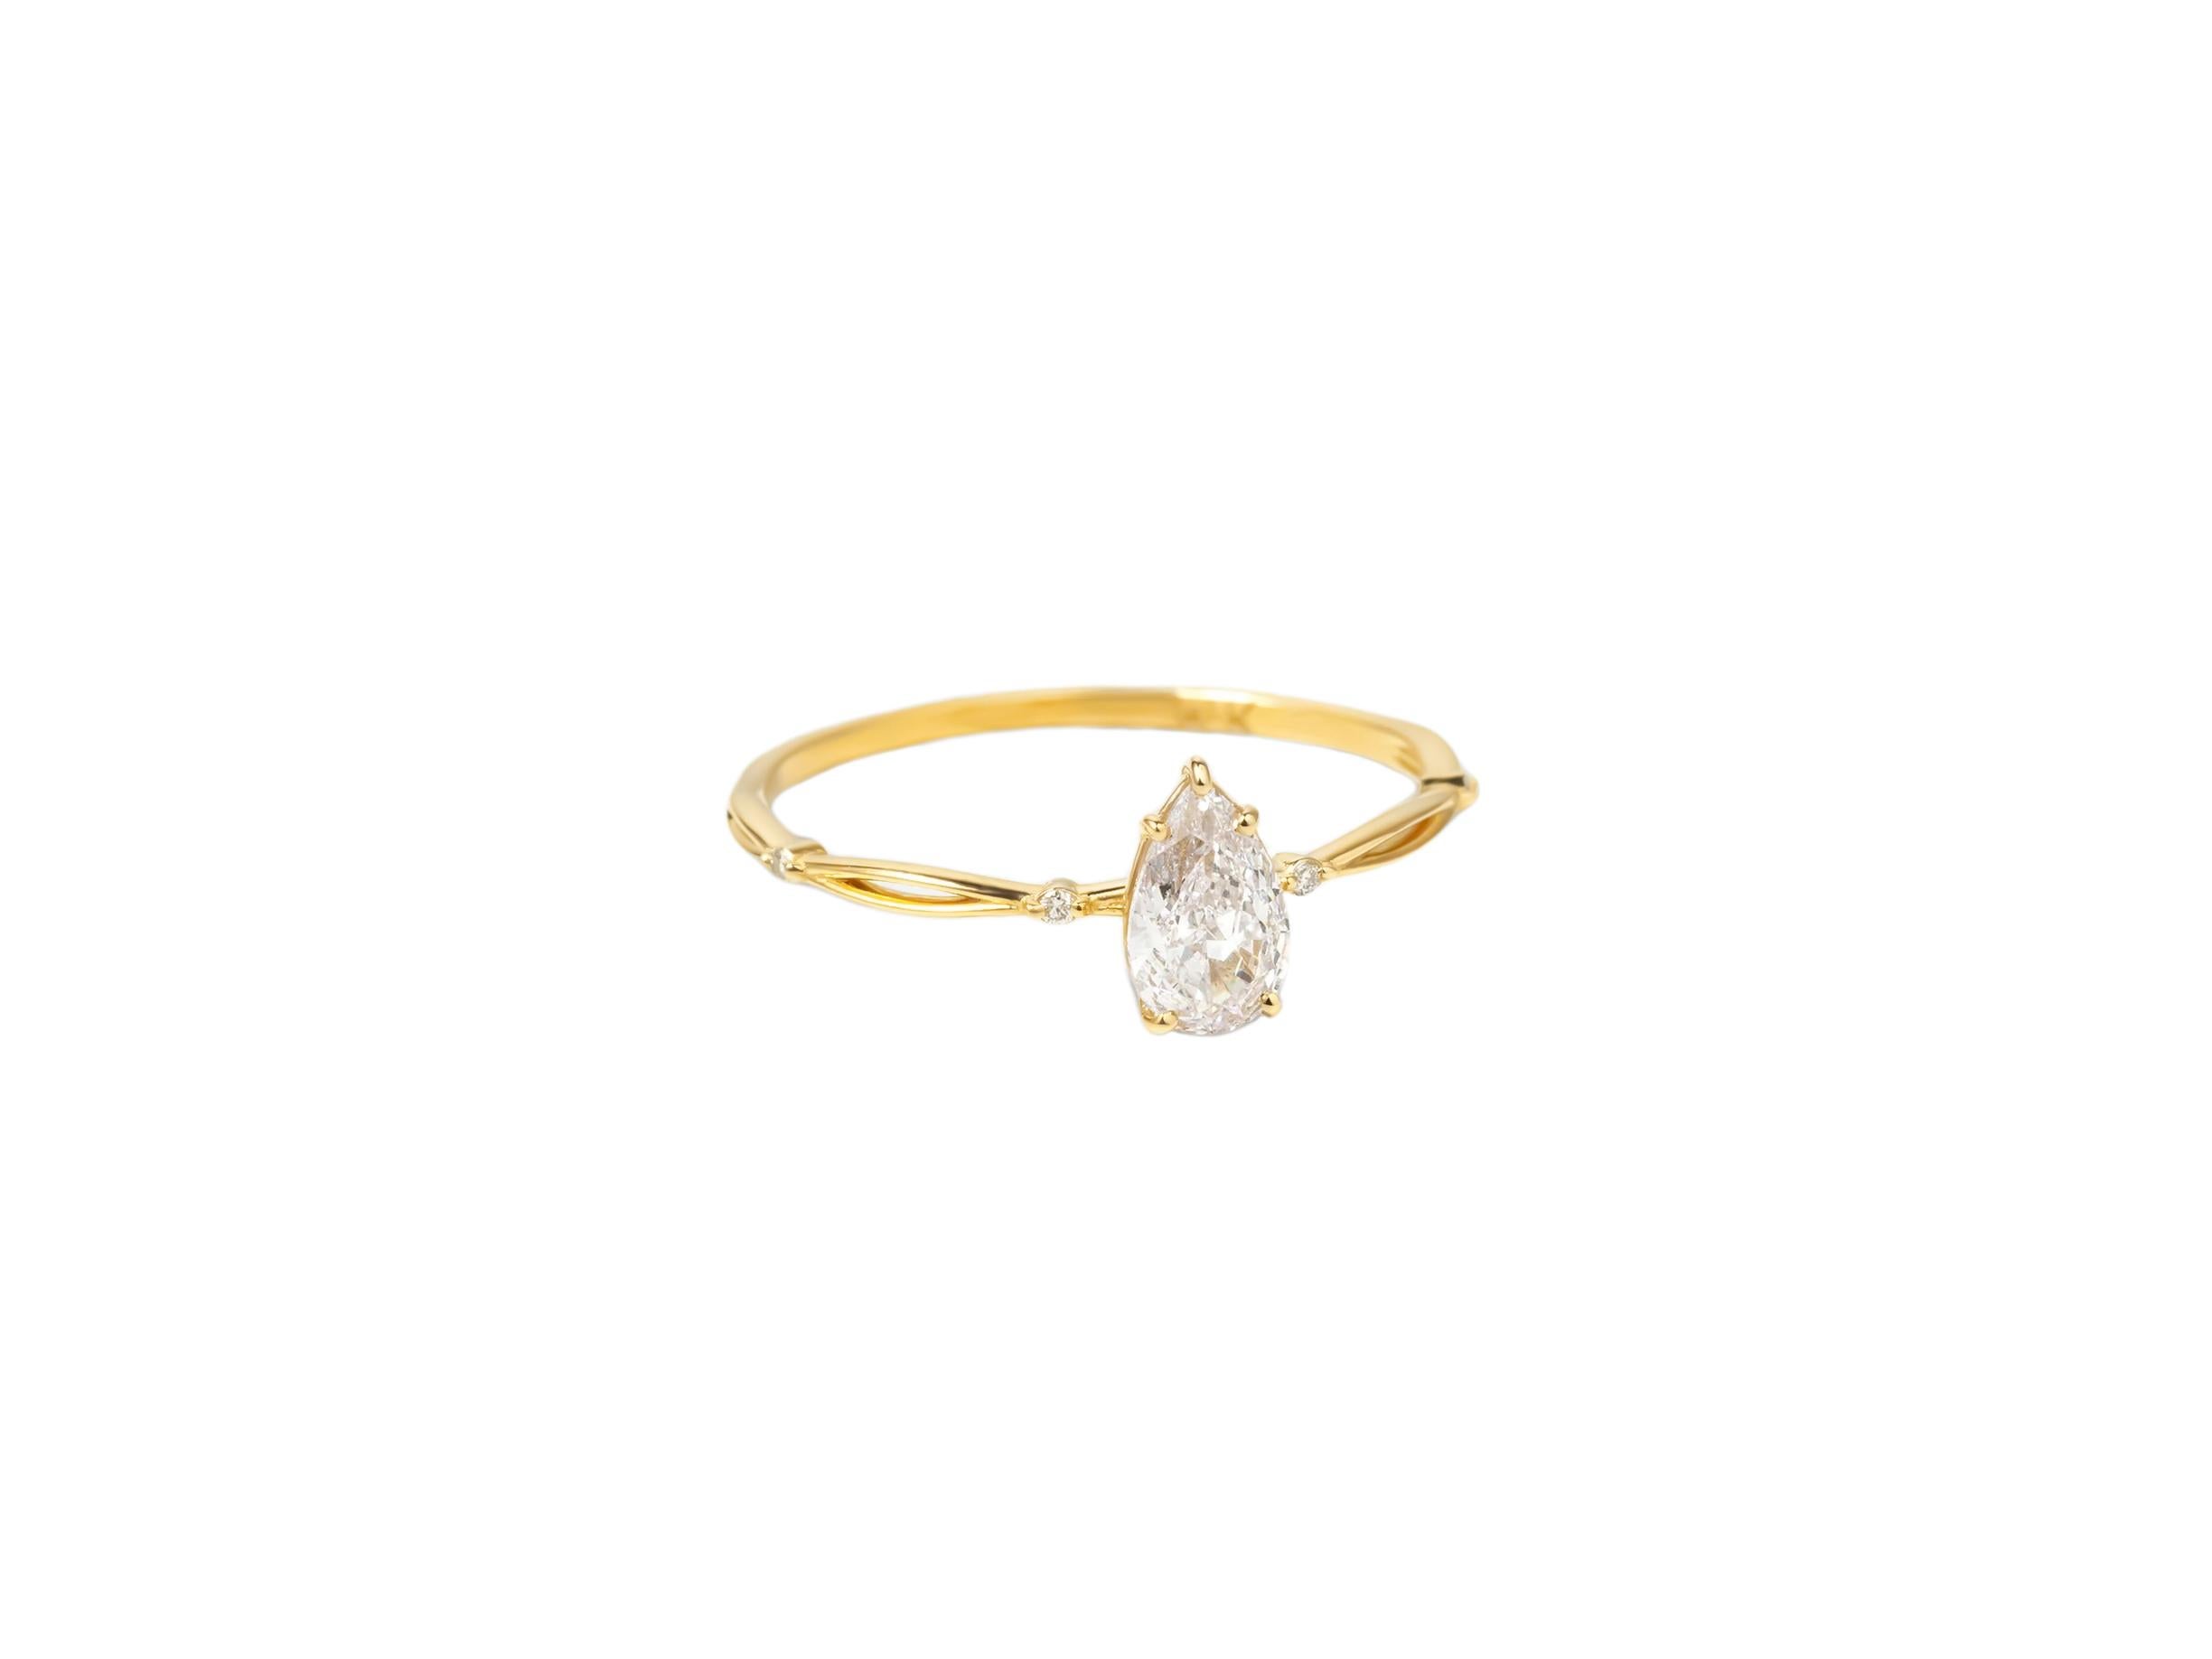 0.5 ct Pear moissanite 14k gold ring. Moissanite solitaire. Plain moissanite ring. Diamond cut moissanite ring. Moissanite engagement ring.  

Metal: 14k gold
Weight: 2 gr depends from size
Moissanite: weight 0.5 ct, D/ VS, pear cut
Side stones: